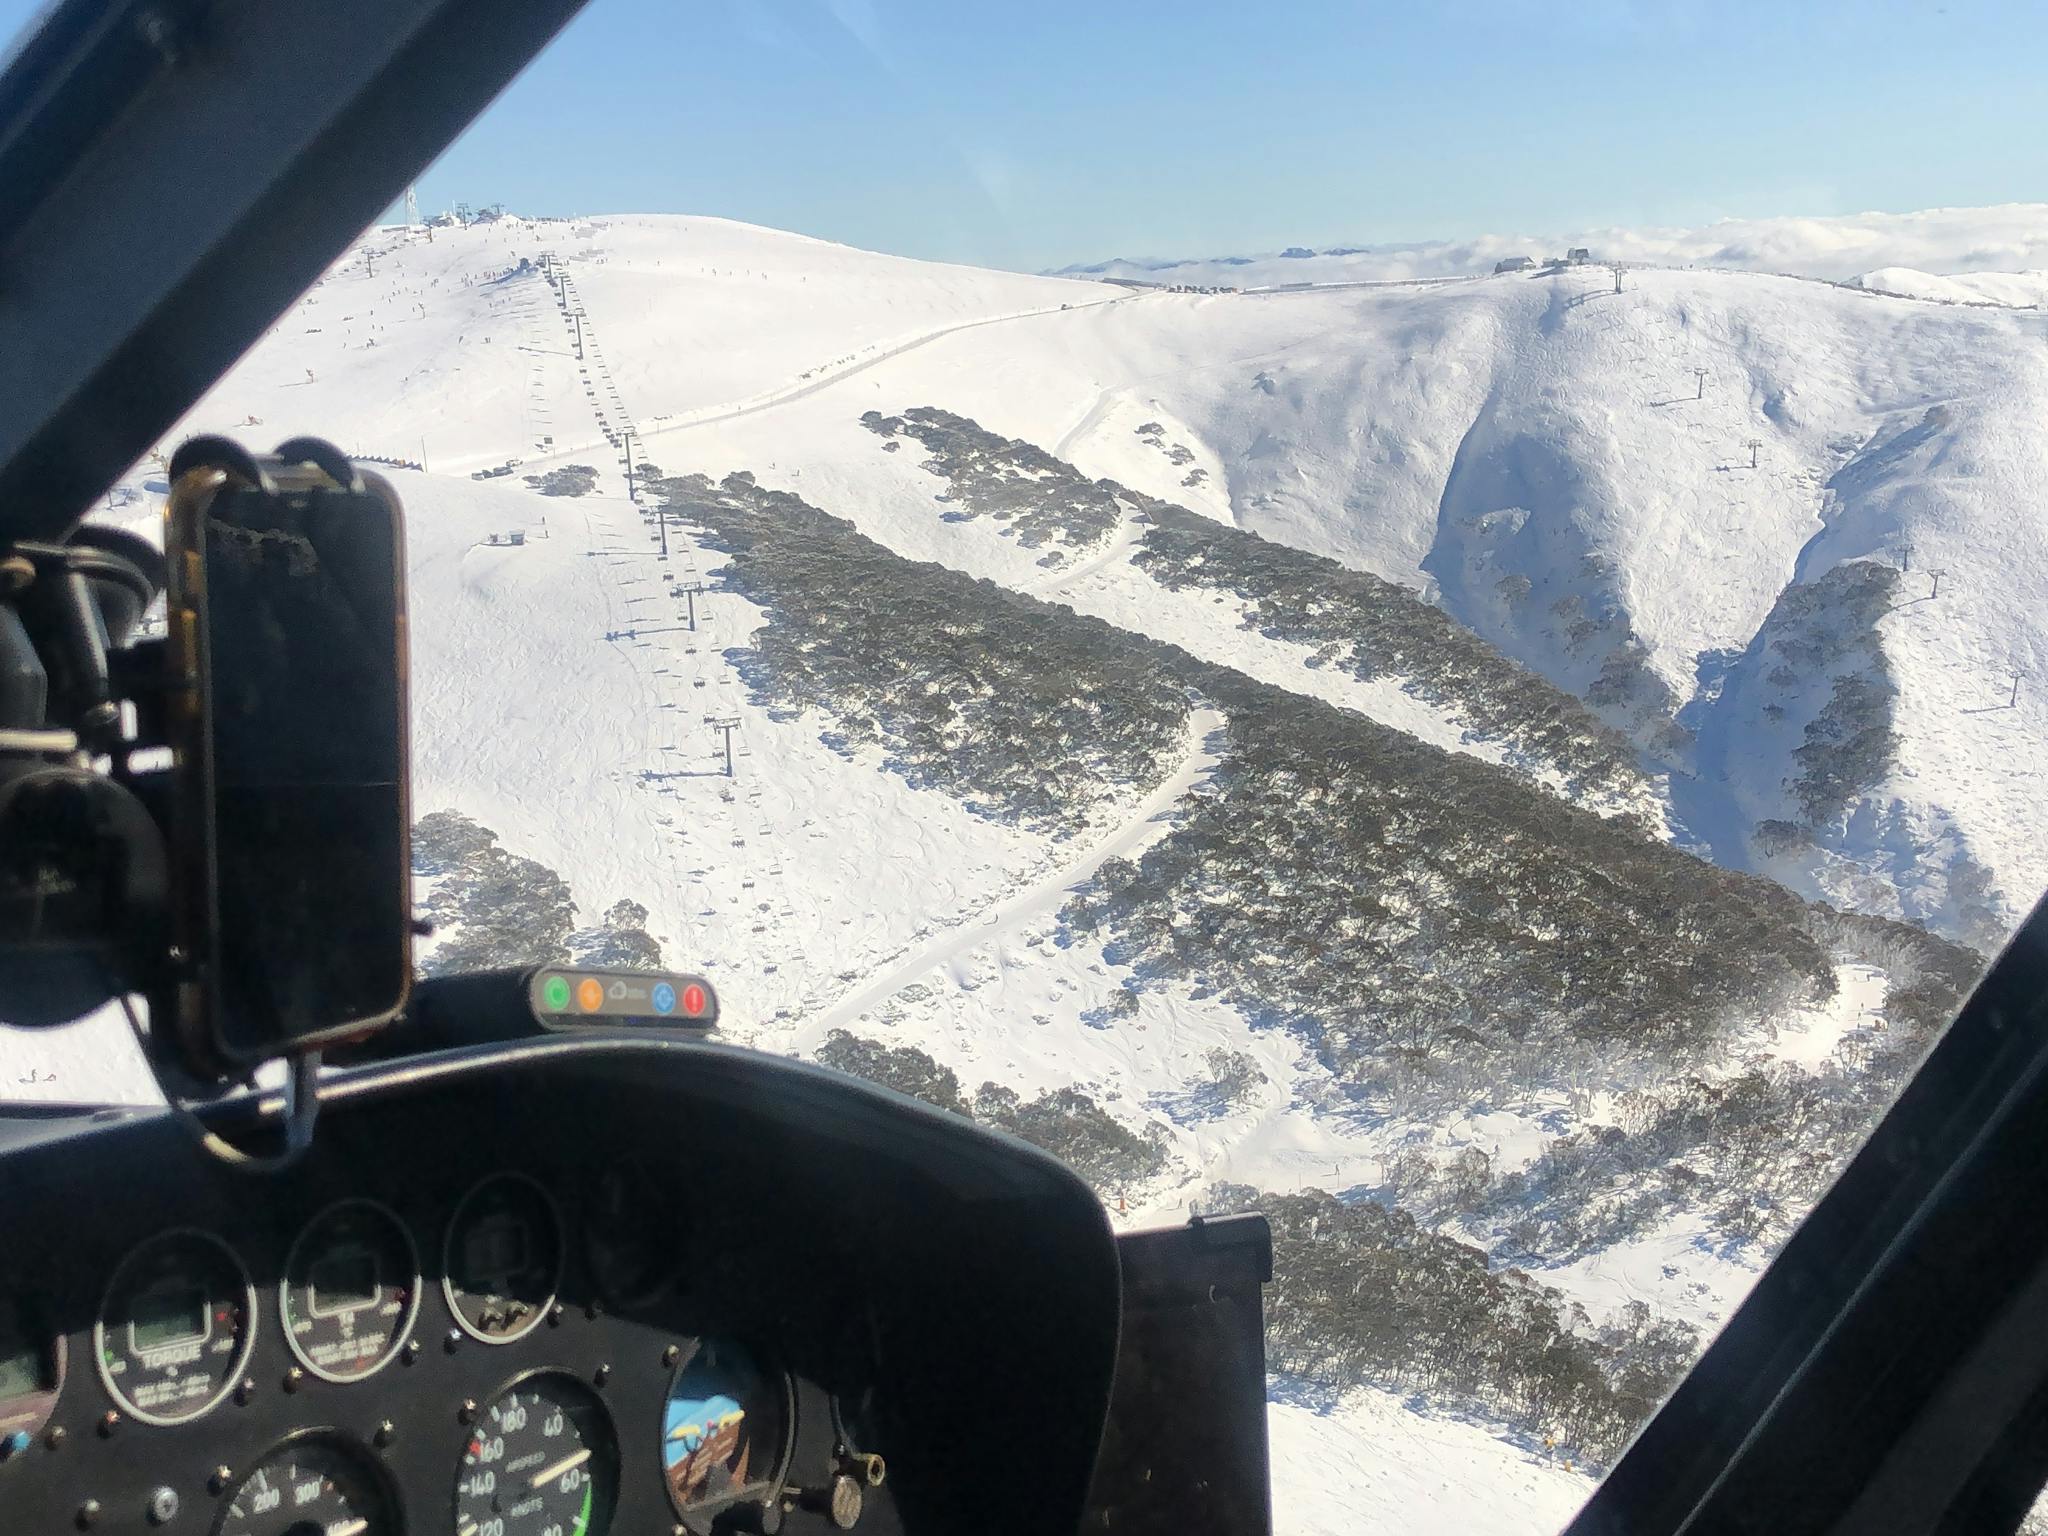 Flying to Mt Hotham on the Helicopter